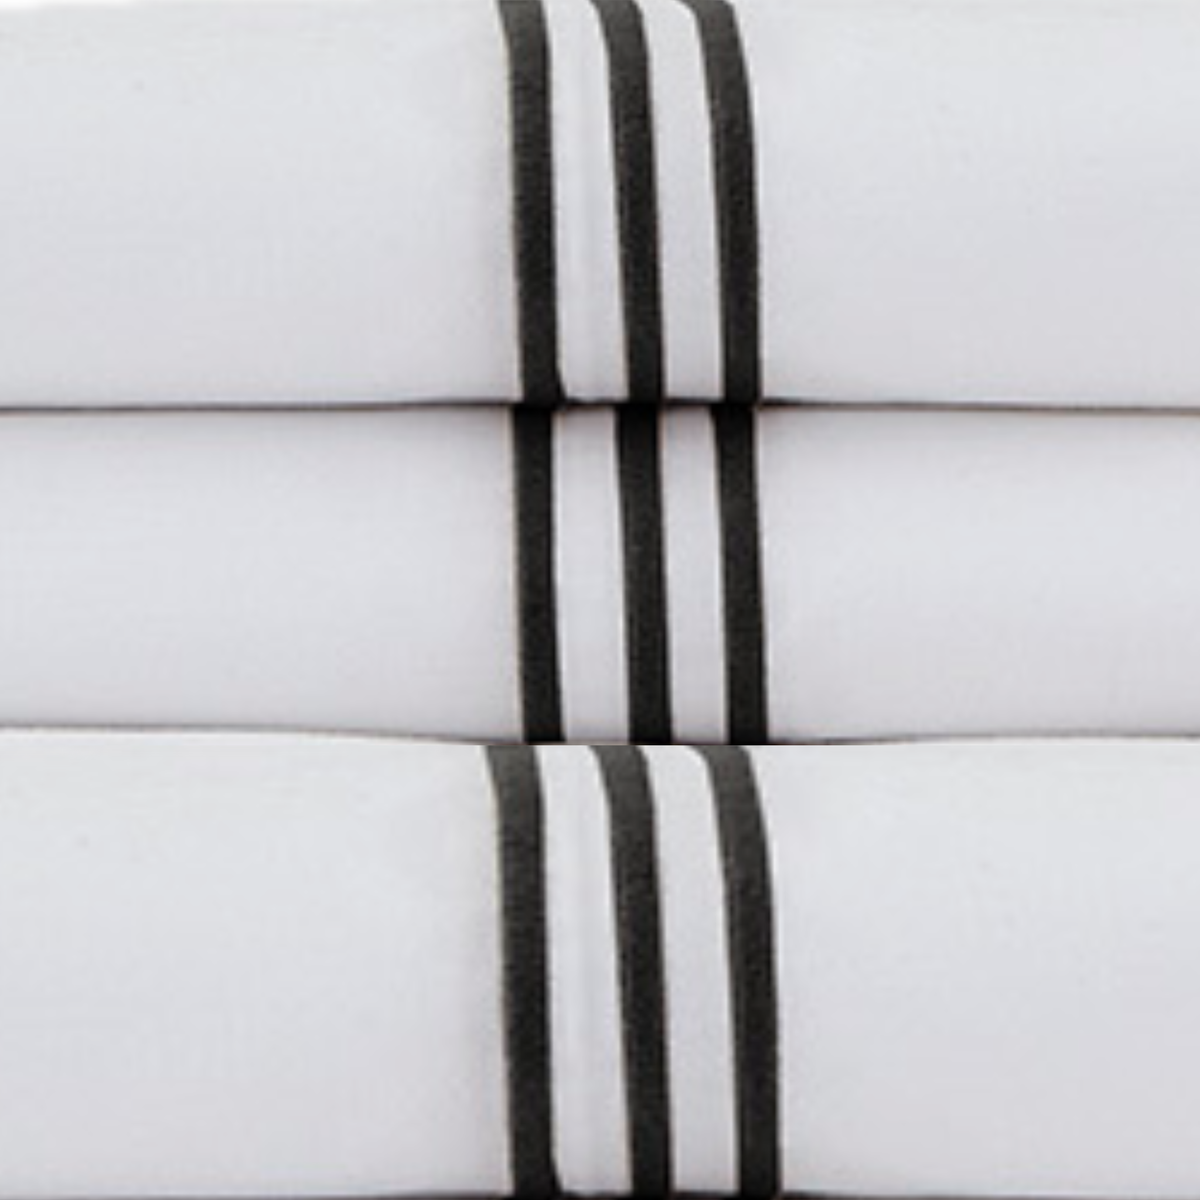 Swatch Sample of Downtown Company Madison Bedding Collection in Black Color